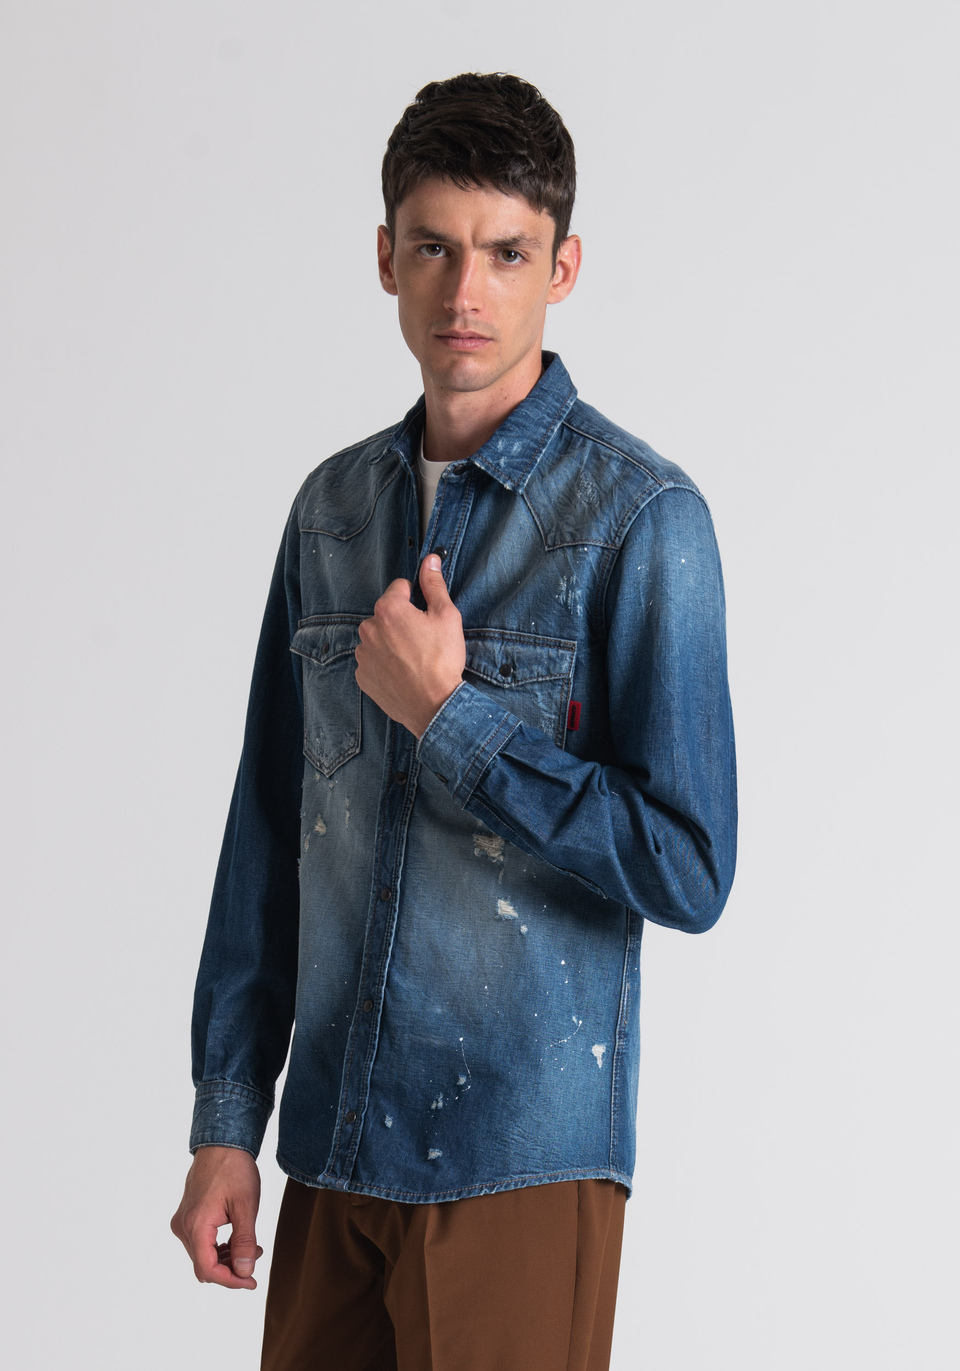 SLIM-FIT SHIRT IN USED-EFFECT DENIM WITH DISTRESSED DETAILS - Antony Morato Online Shop